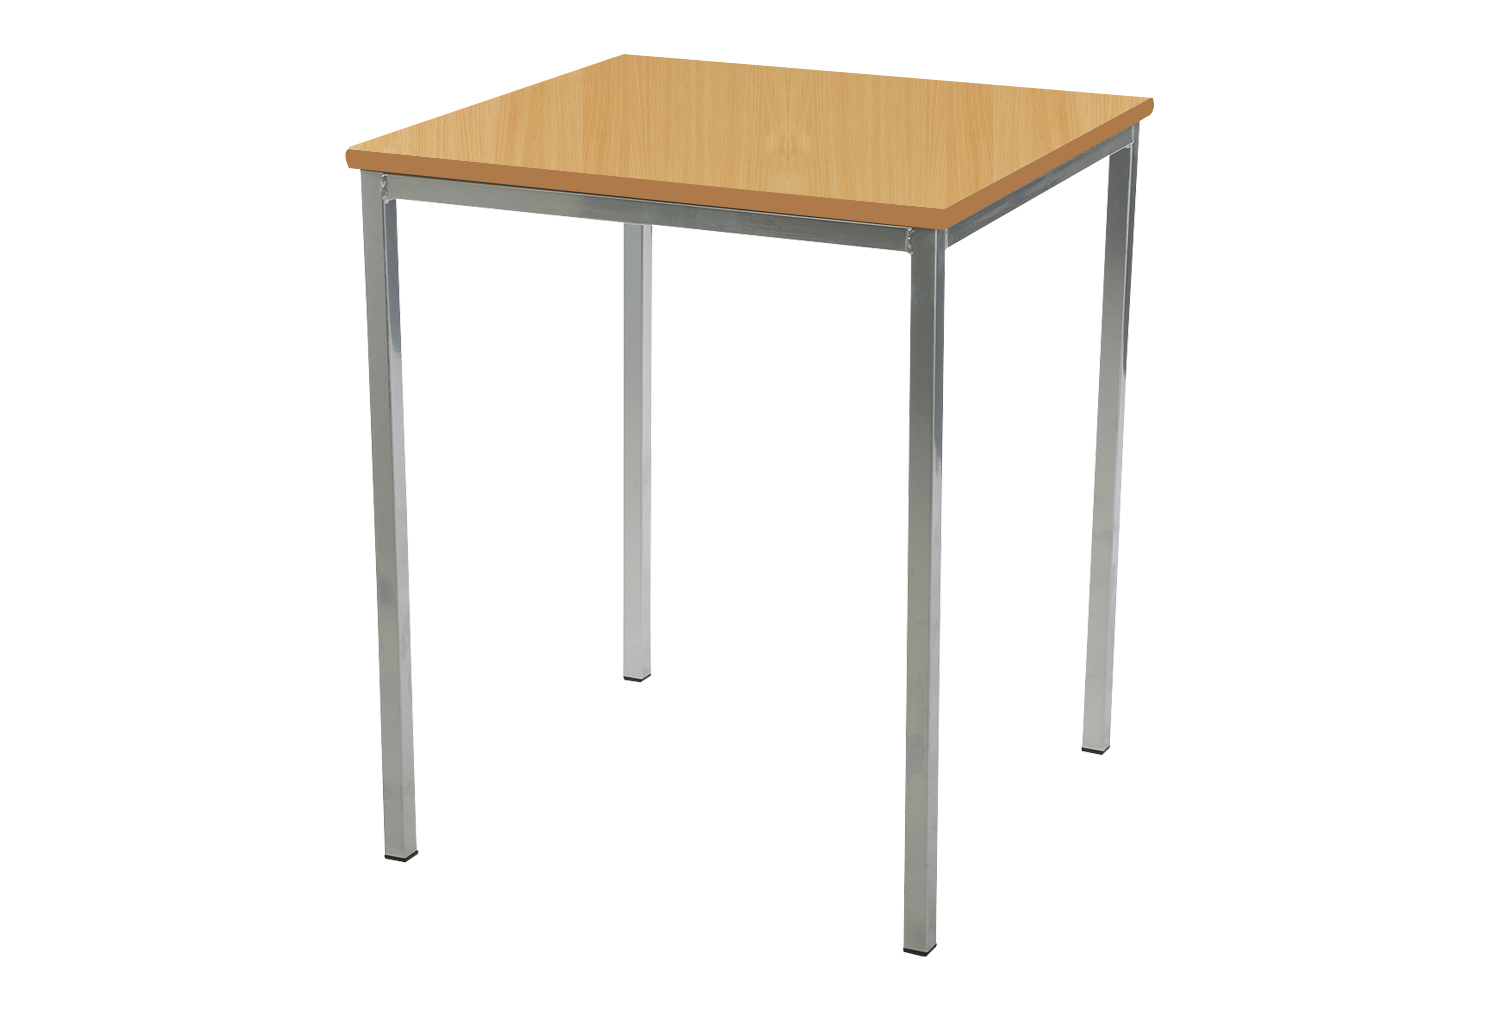 Qty 6 - Educate Fully Welded Square School Classroom Tables 11-14 Years (MDF Edge), 60wx60d (cm), Dark Grey Frame, Light Grey Top, MDF Edge